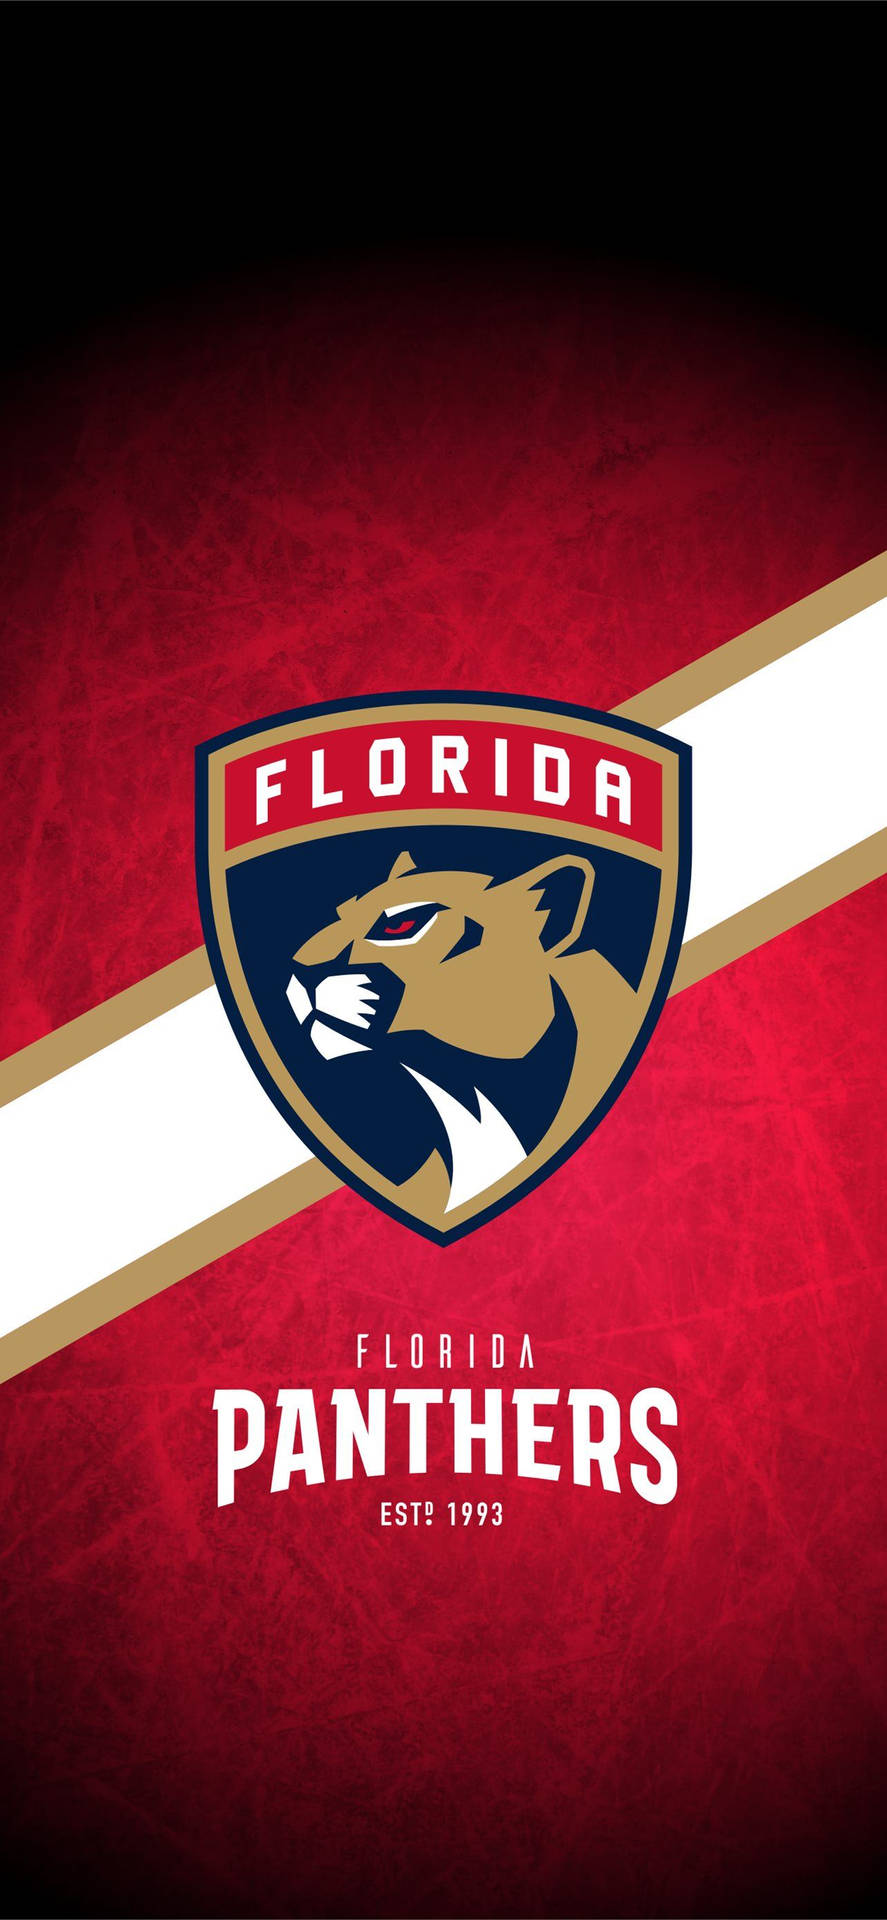 Florida Panthers Hockey Team In Action